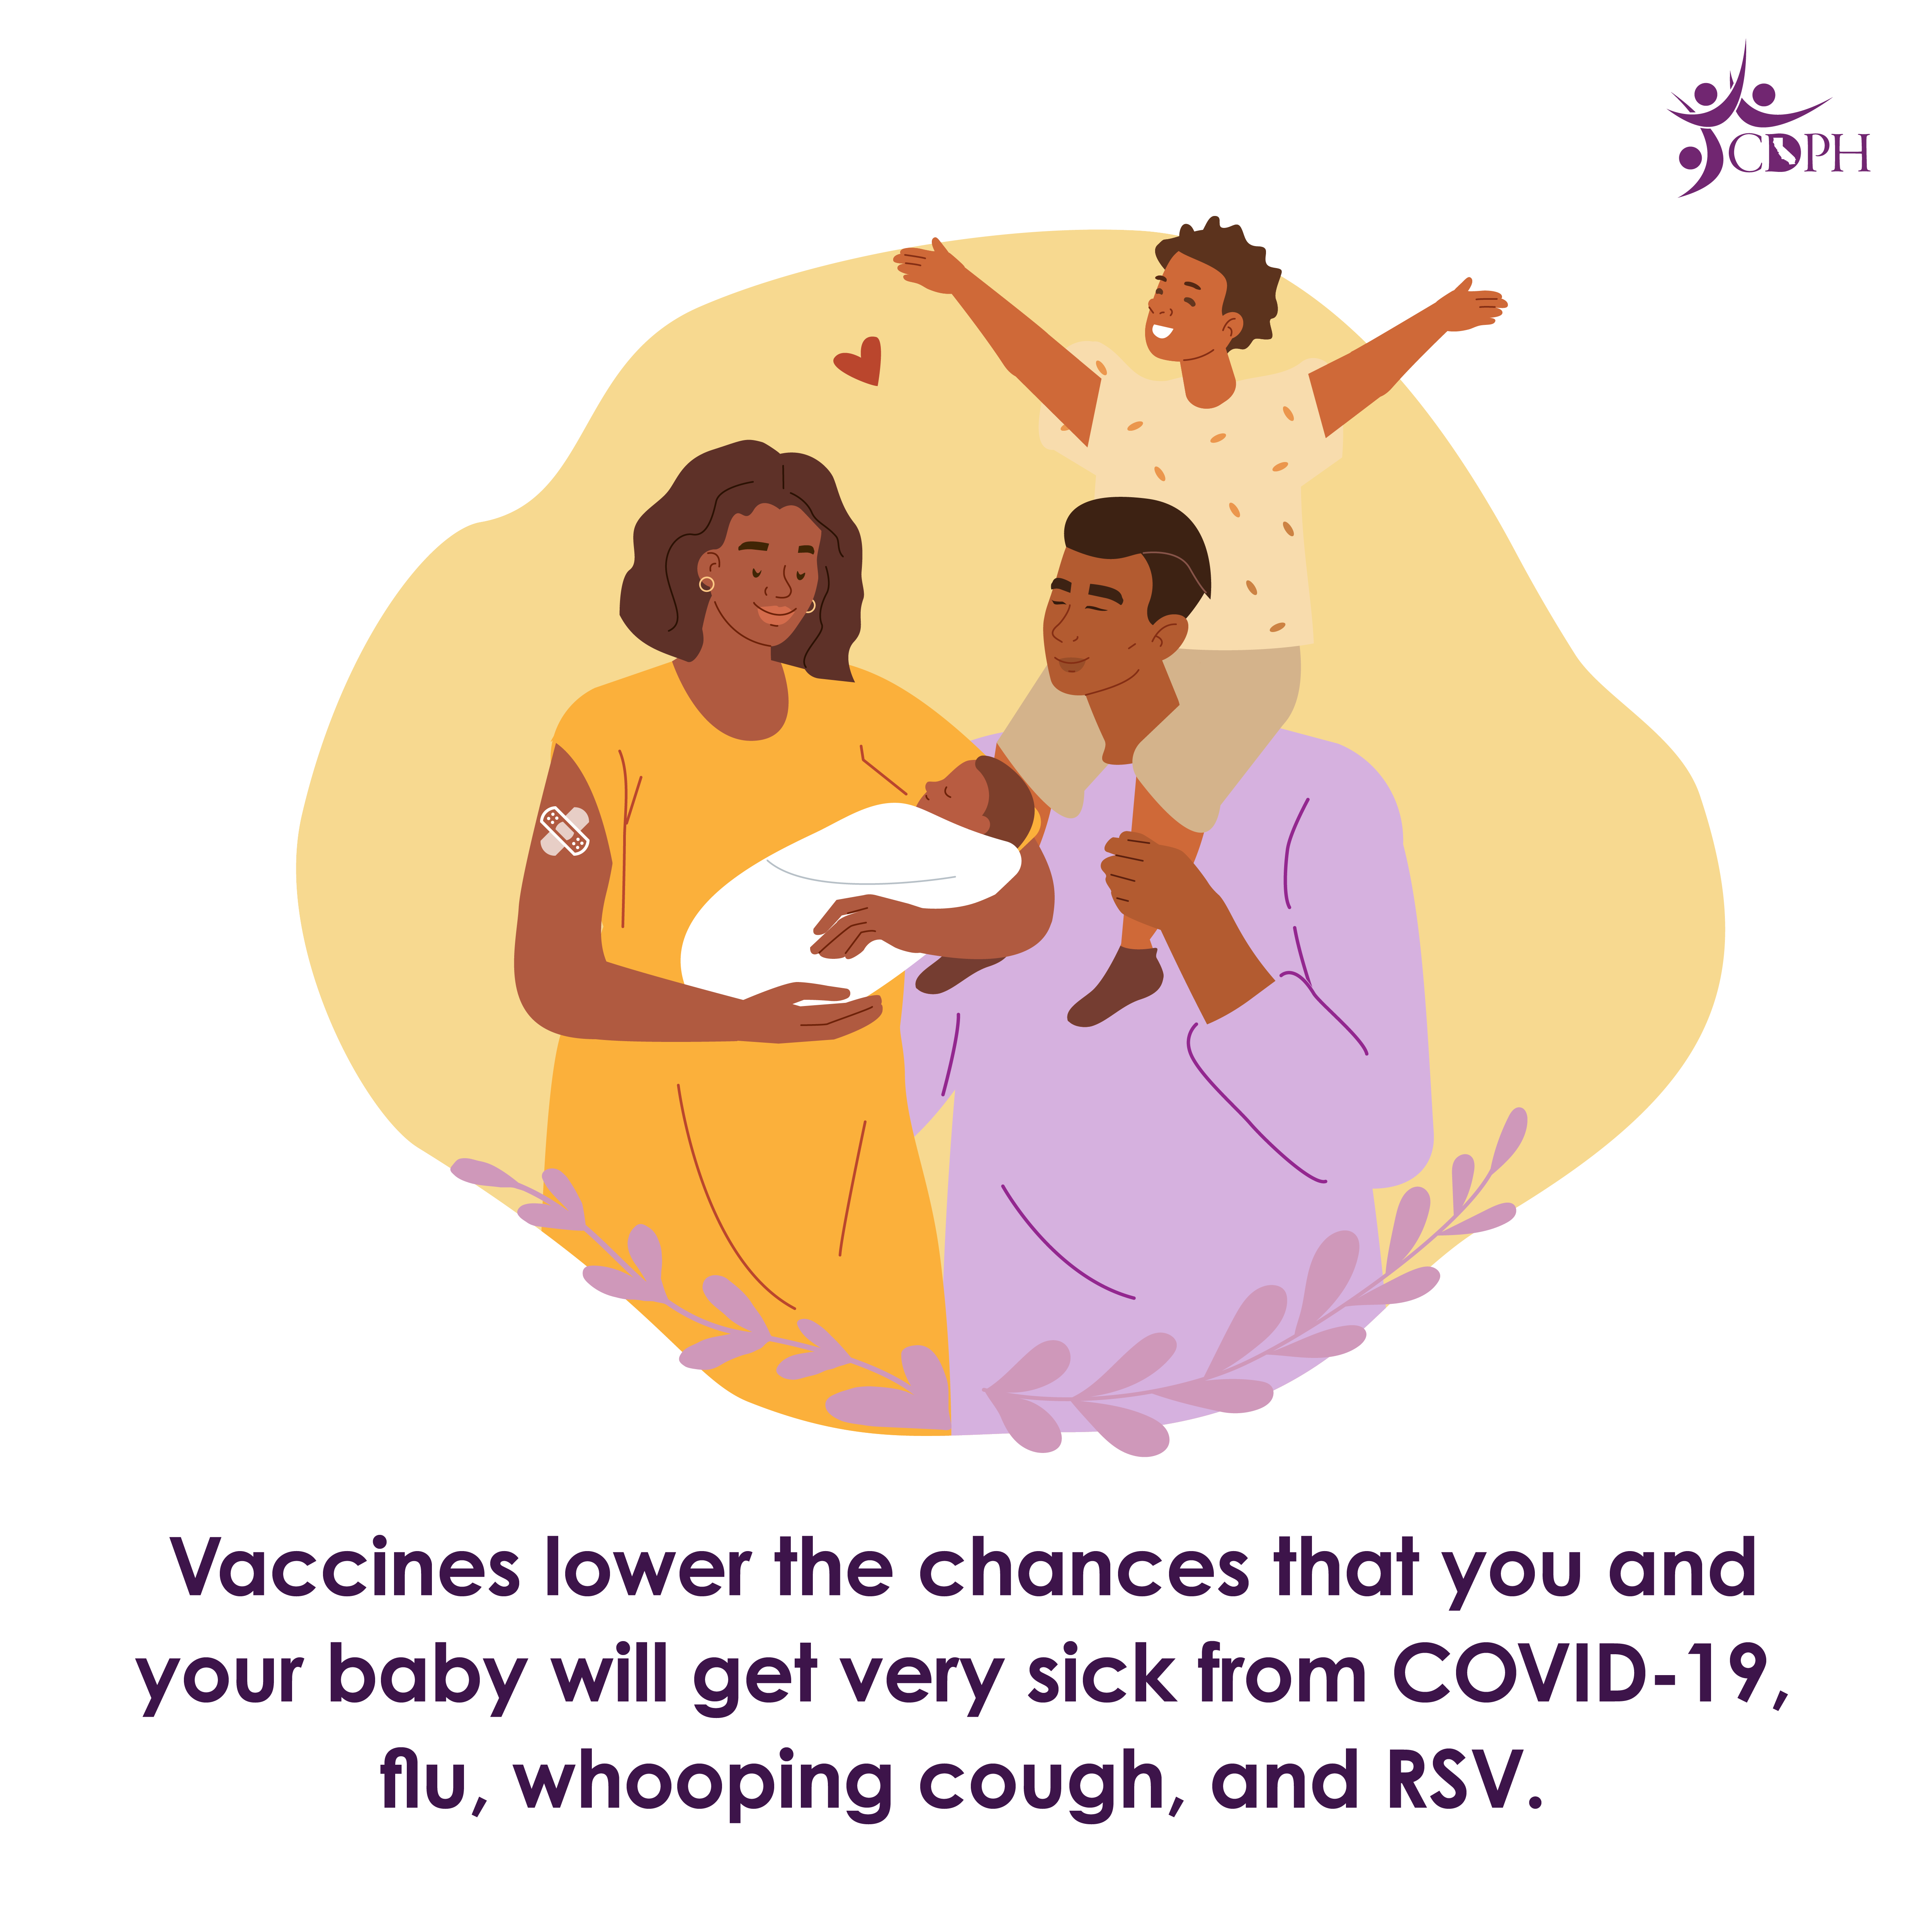 Vaccines lower the chances that you and your baby will get very sick from COVID-19, flu and RSV